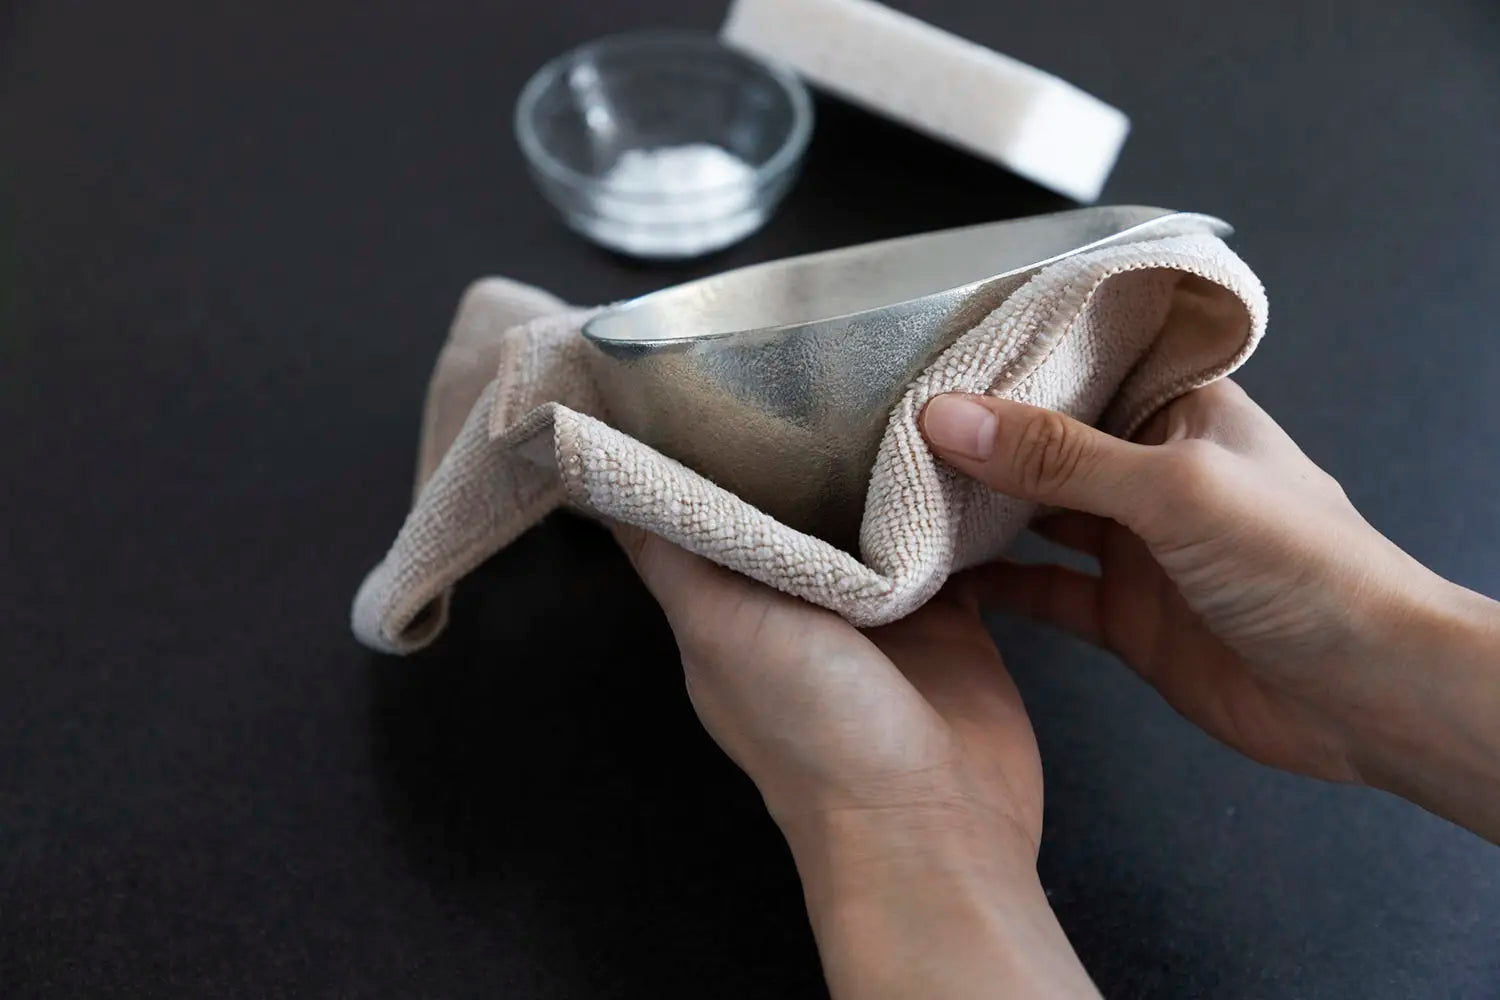 Wiping off tinware with a dry towel